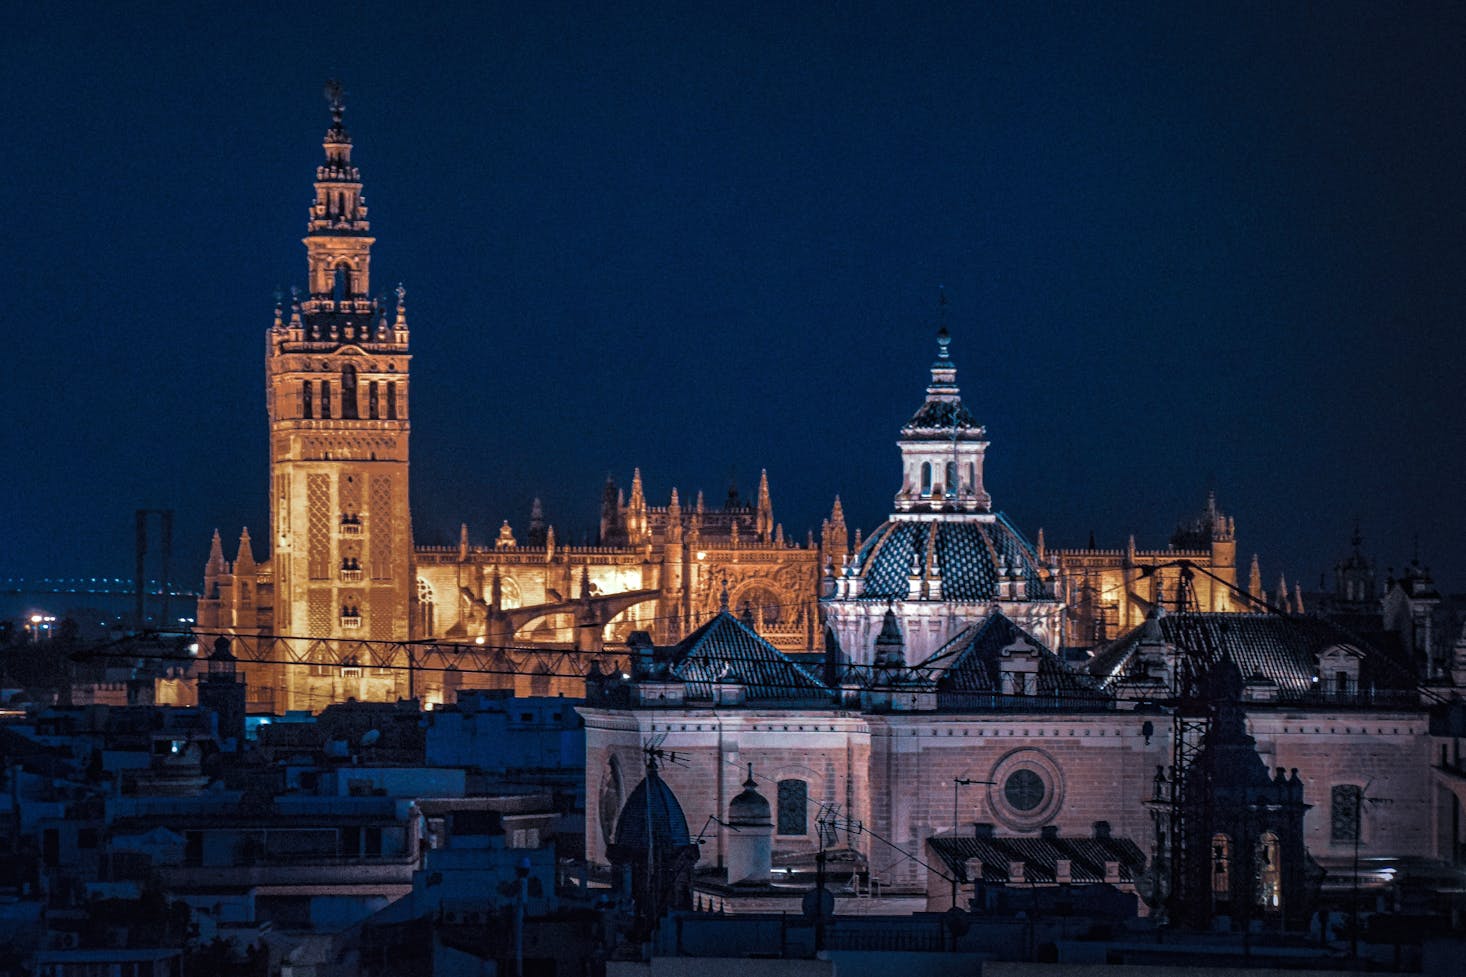 Things to do at night in Seville